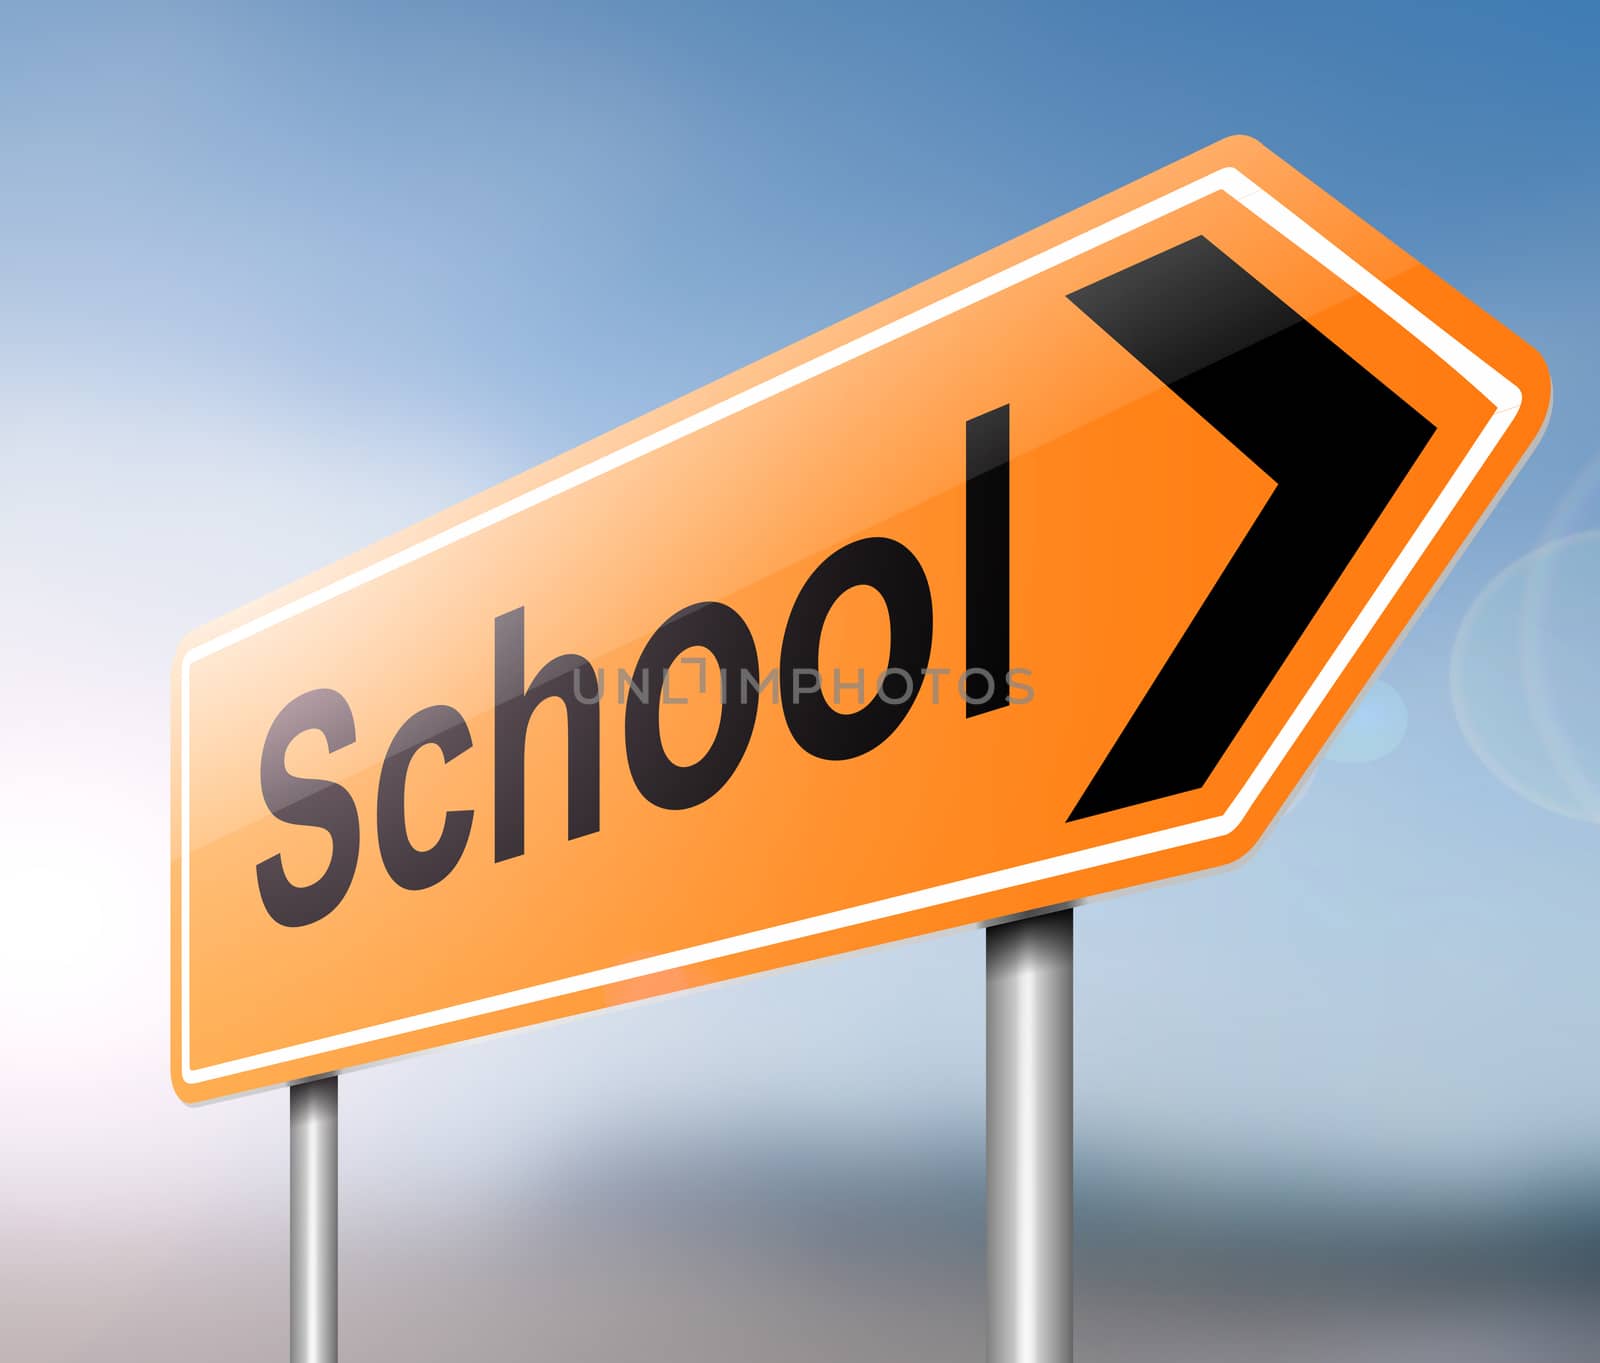 Illustration depicting a sign with a school concept.